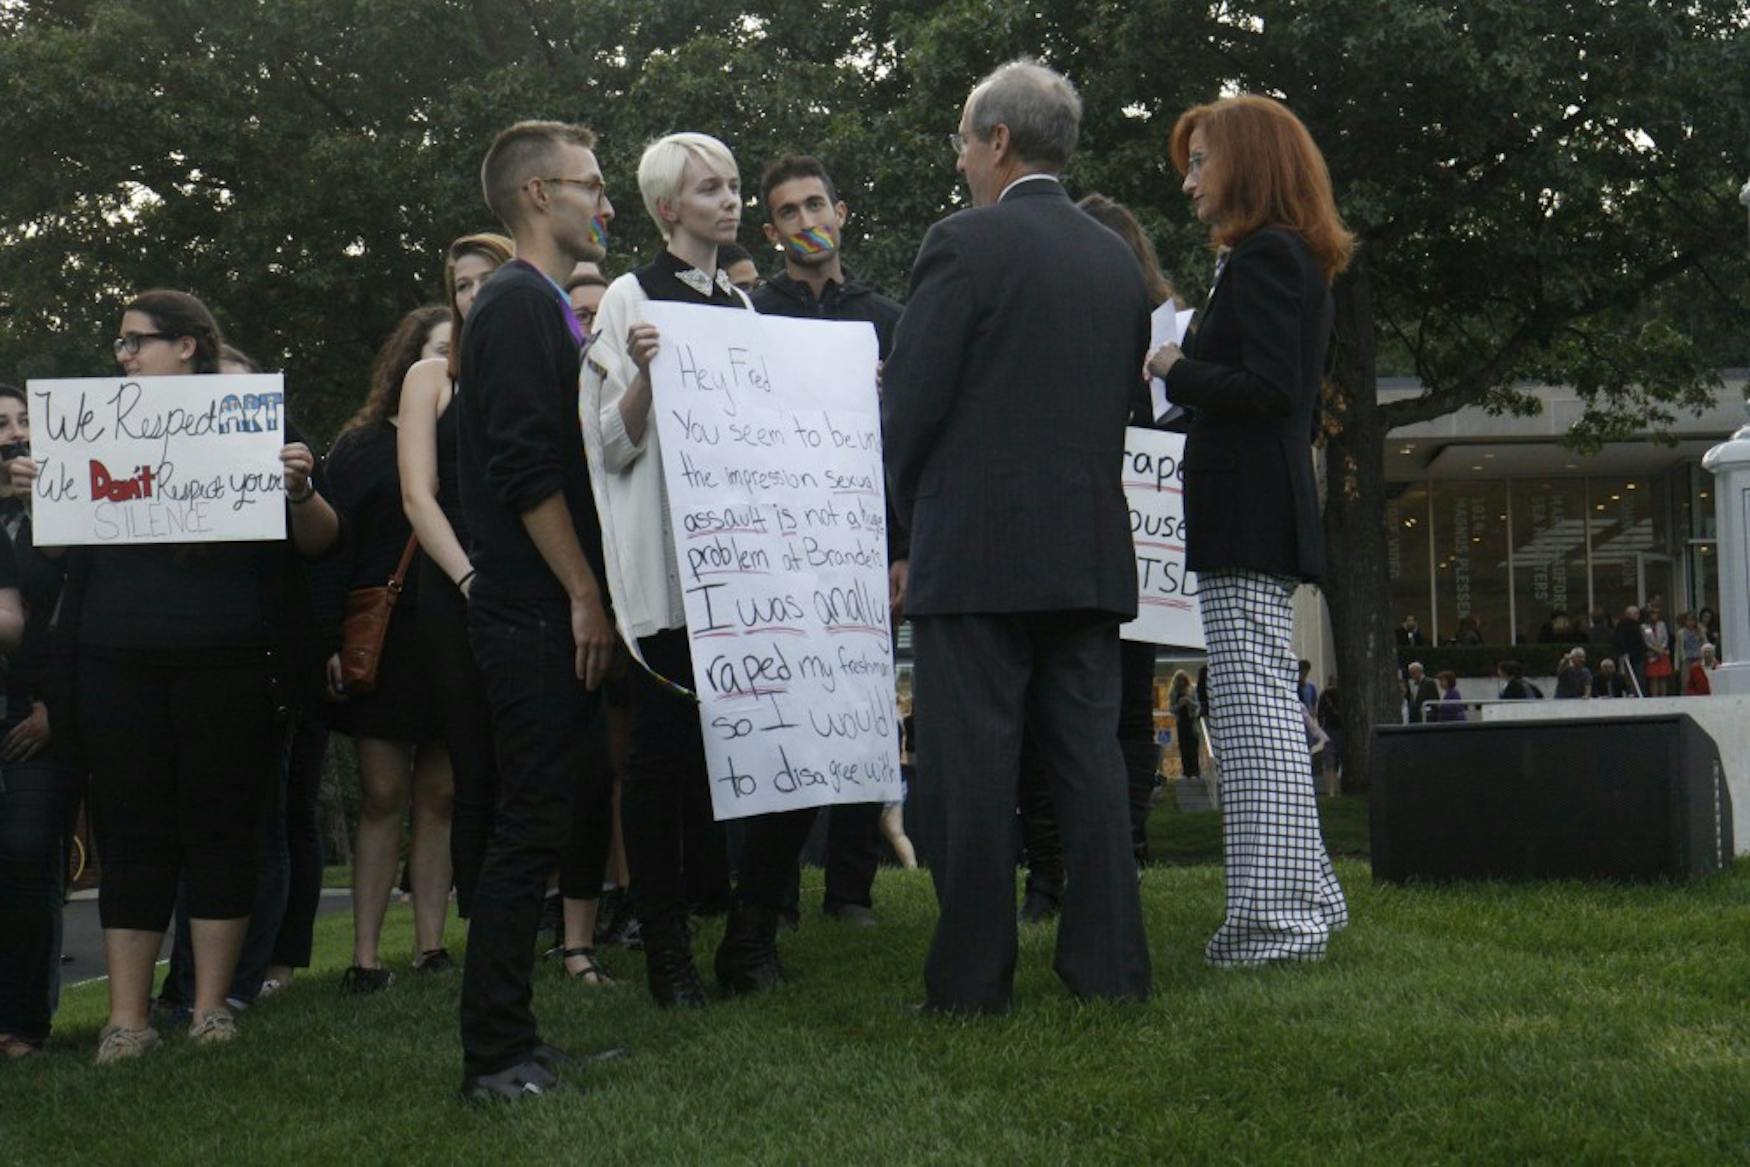 Protesters spoke with University President Frederick Lawrence by the “Light of Reason” installation on Wednesday.